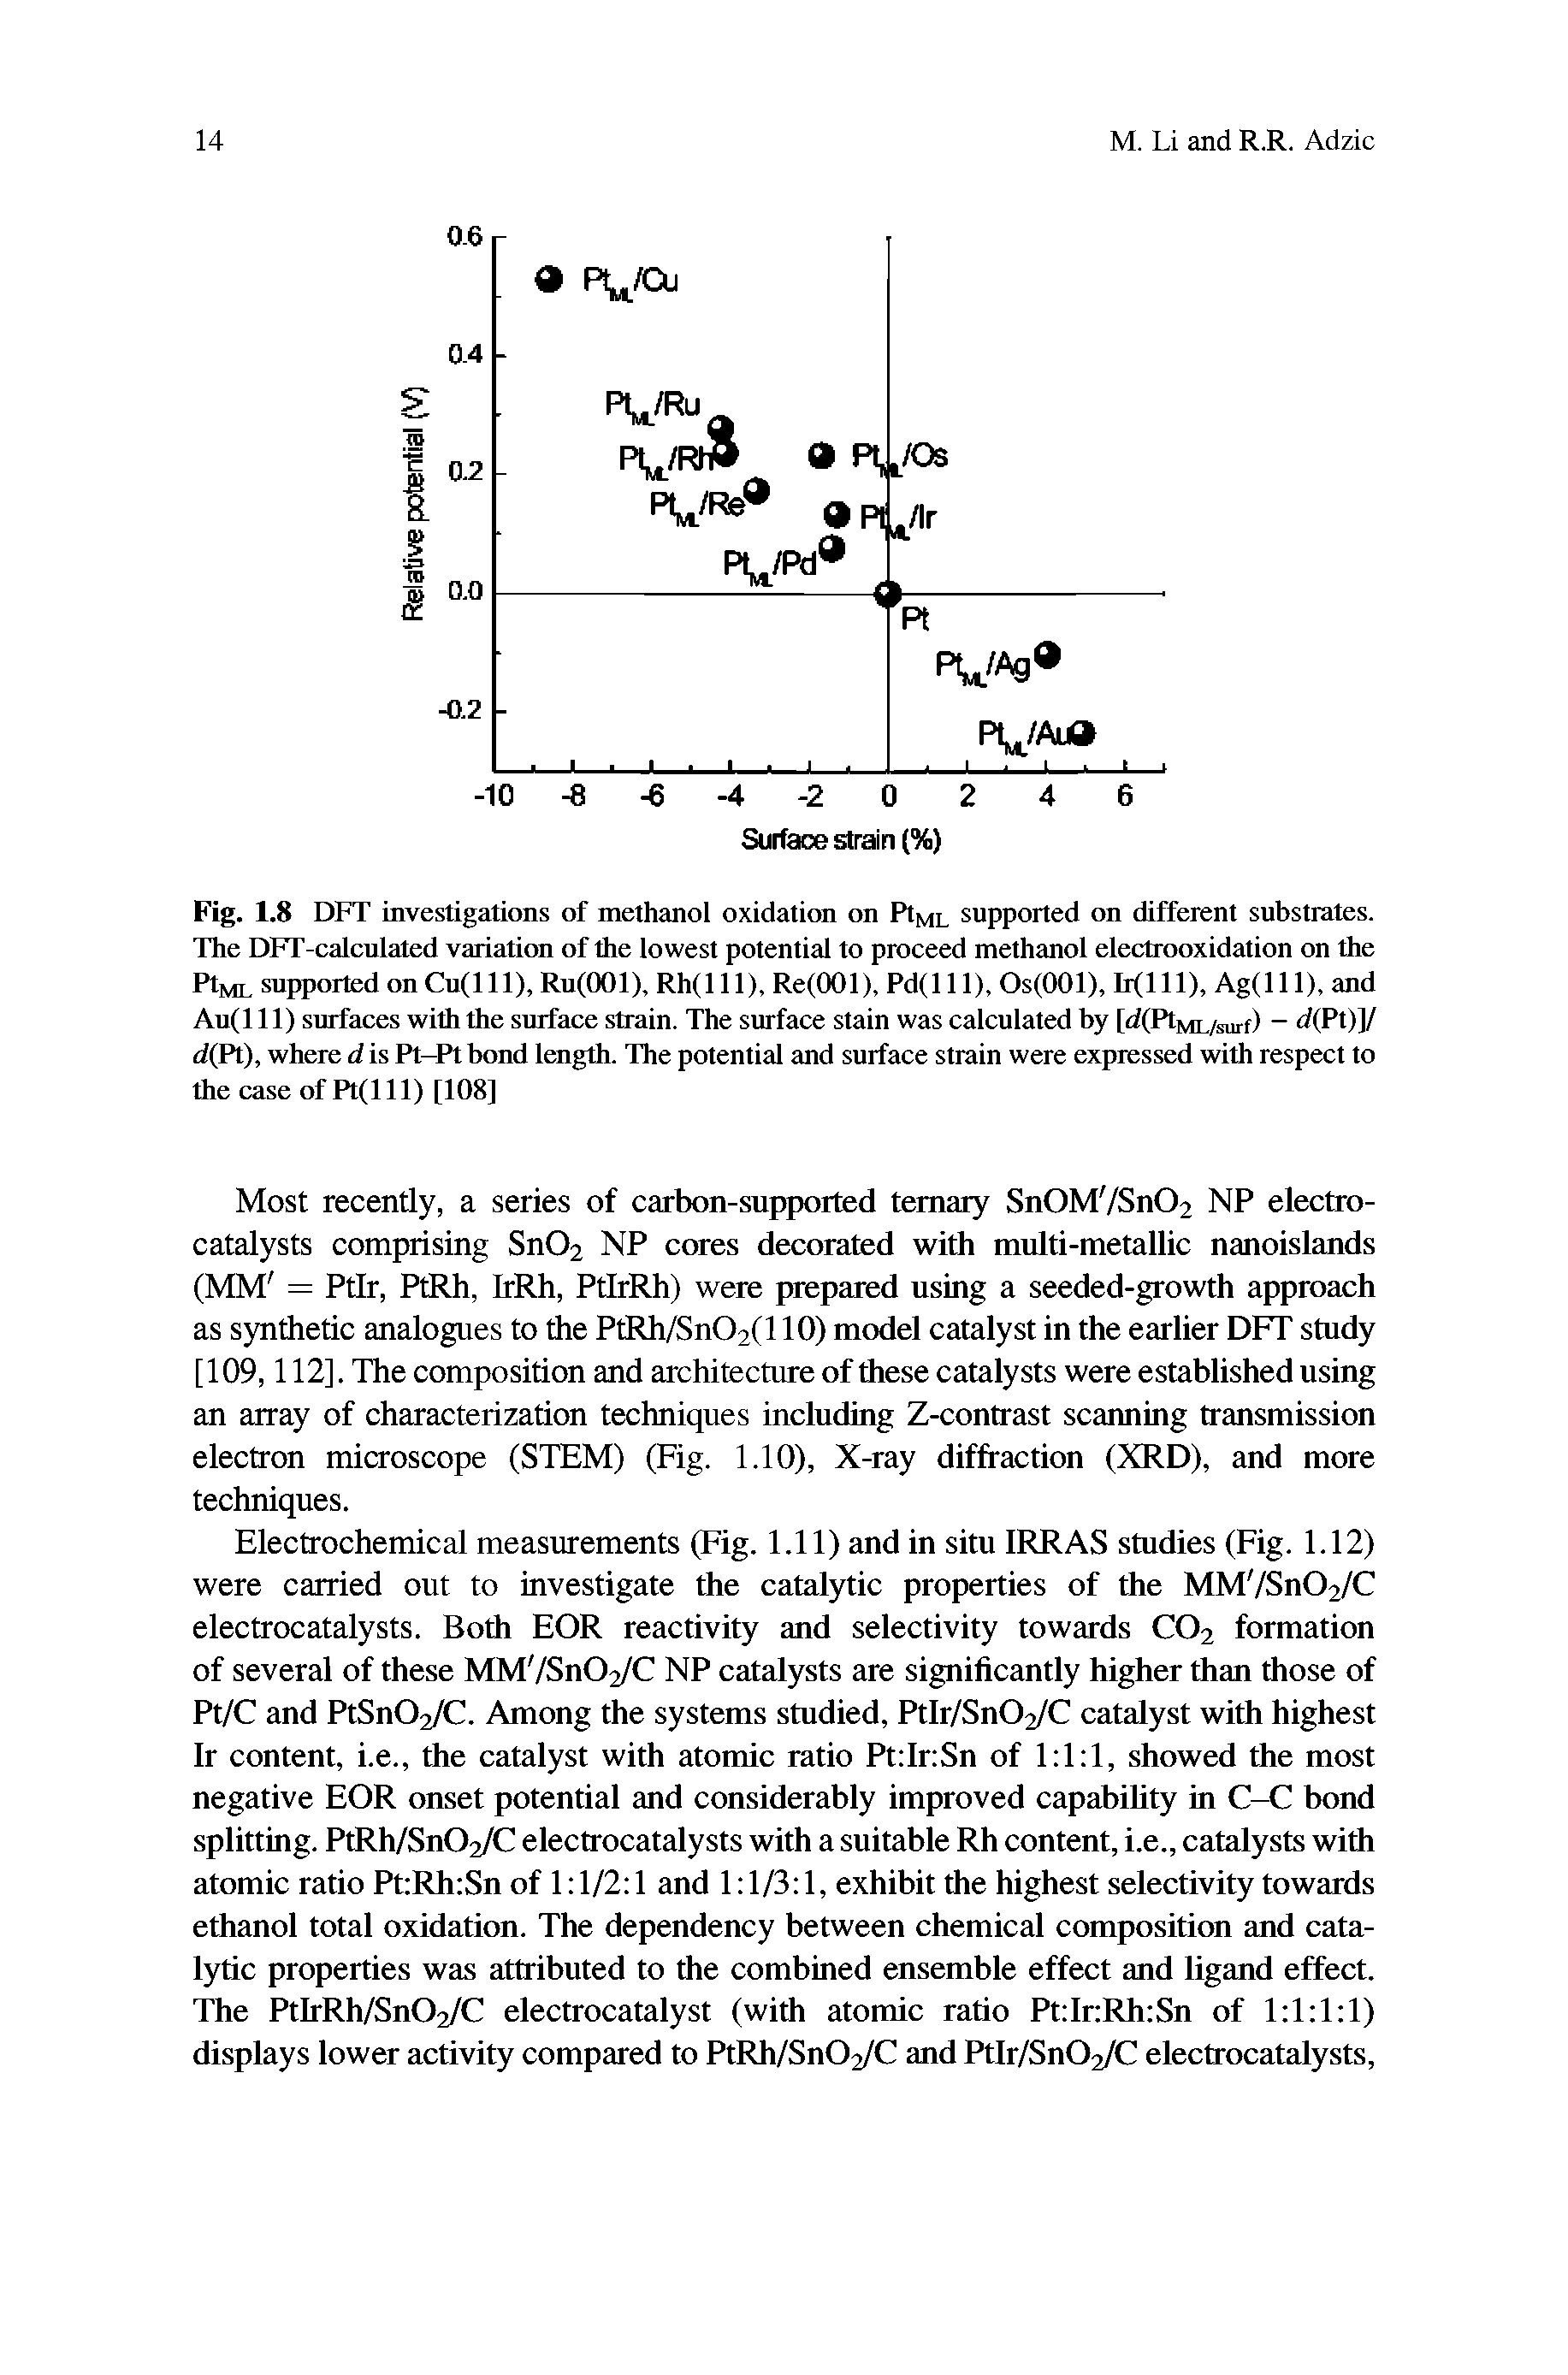 Fig. 1.8 DFT investigations of methanol oxidation on PtML supported on different substrates. The DFT-calculated variation of the lowest potential to proceed methanol electrooxidation on the PtML supported on Cu(lll), Ru(OOl), Rh(l 11), Re(OOl), Pd(l 11), Os(001), Ag(ll 1), and...